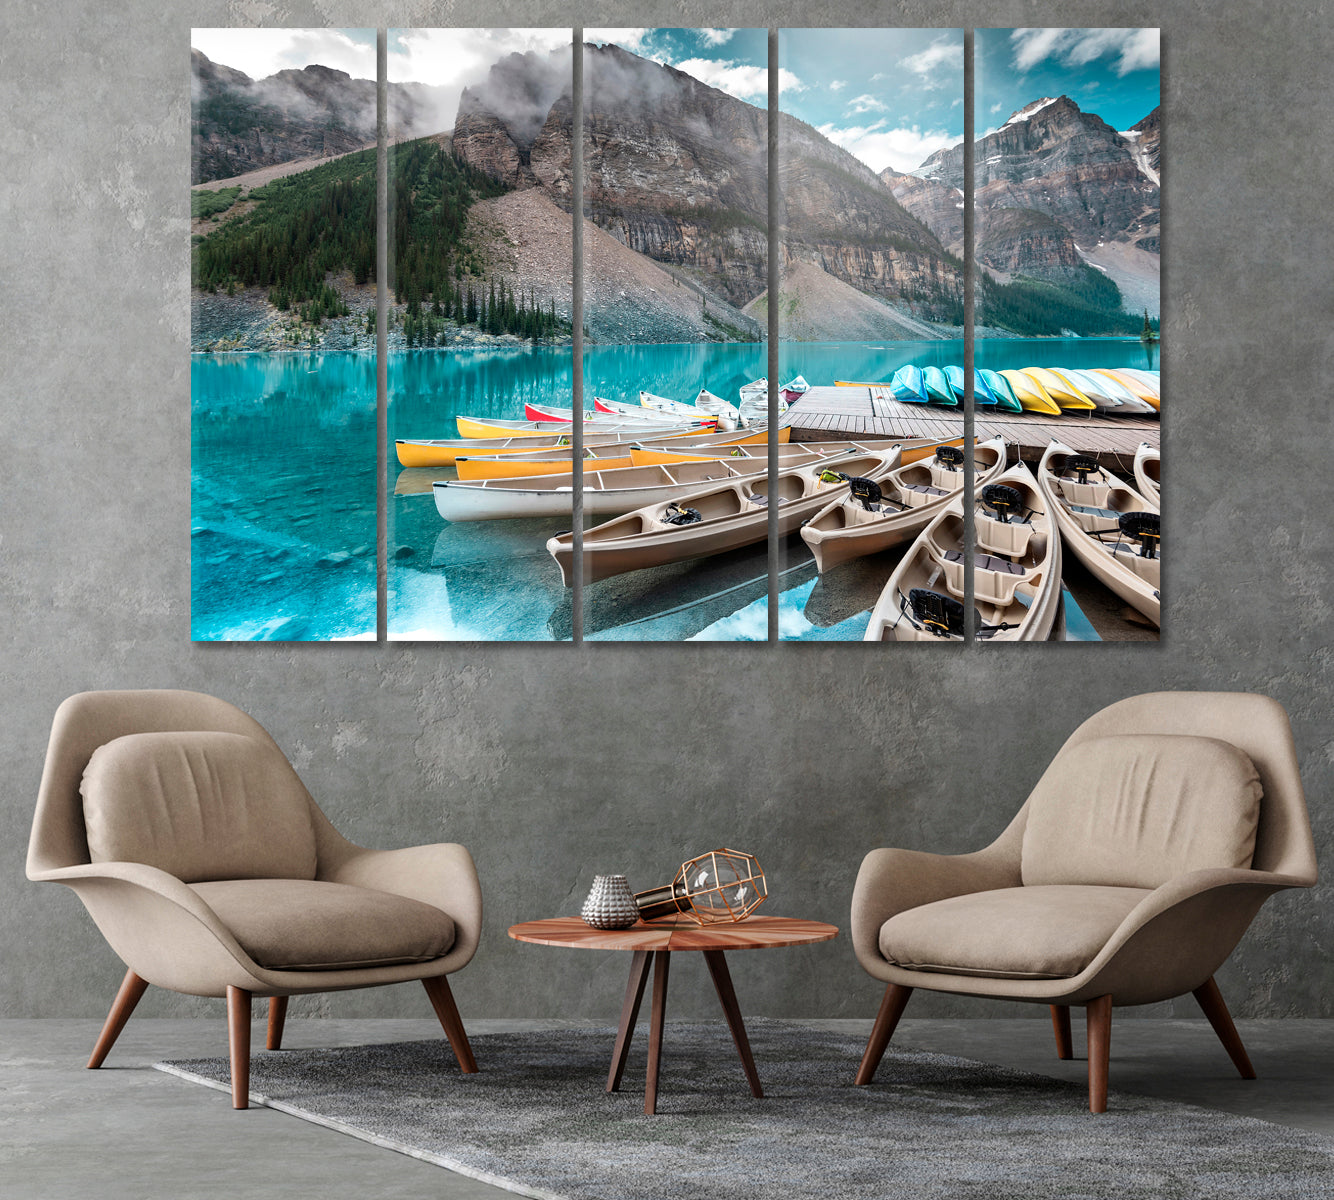 Canoe on the Lake in Banff National Park Canada Canvas Print-Canvas Print-CetArt-1 Panel-24x16 inches-CetArt